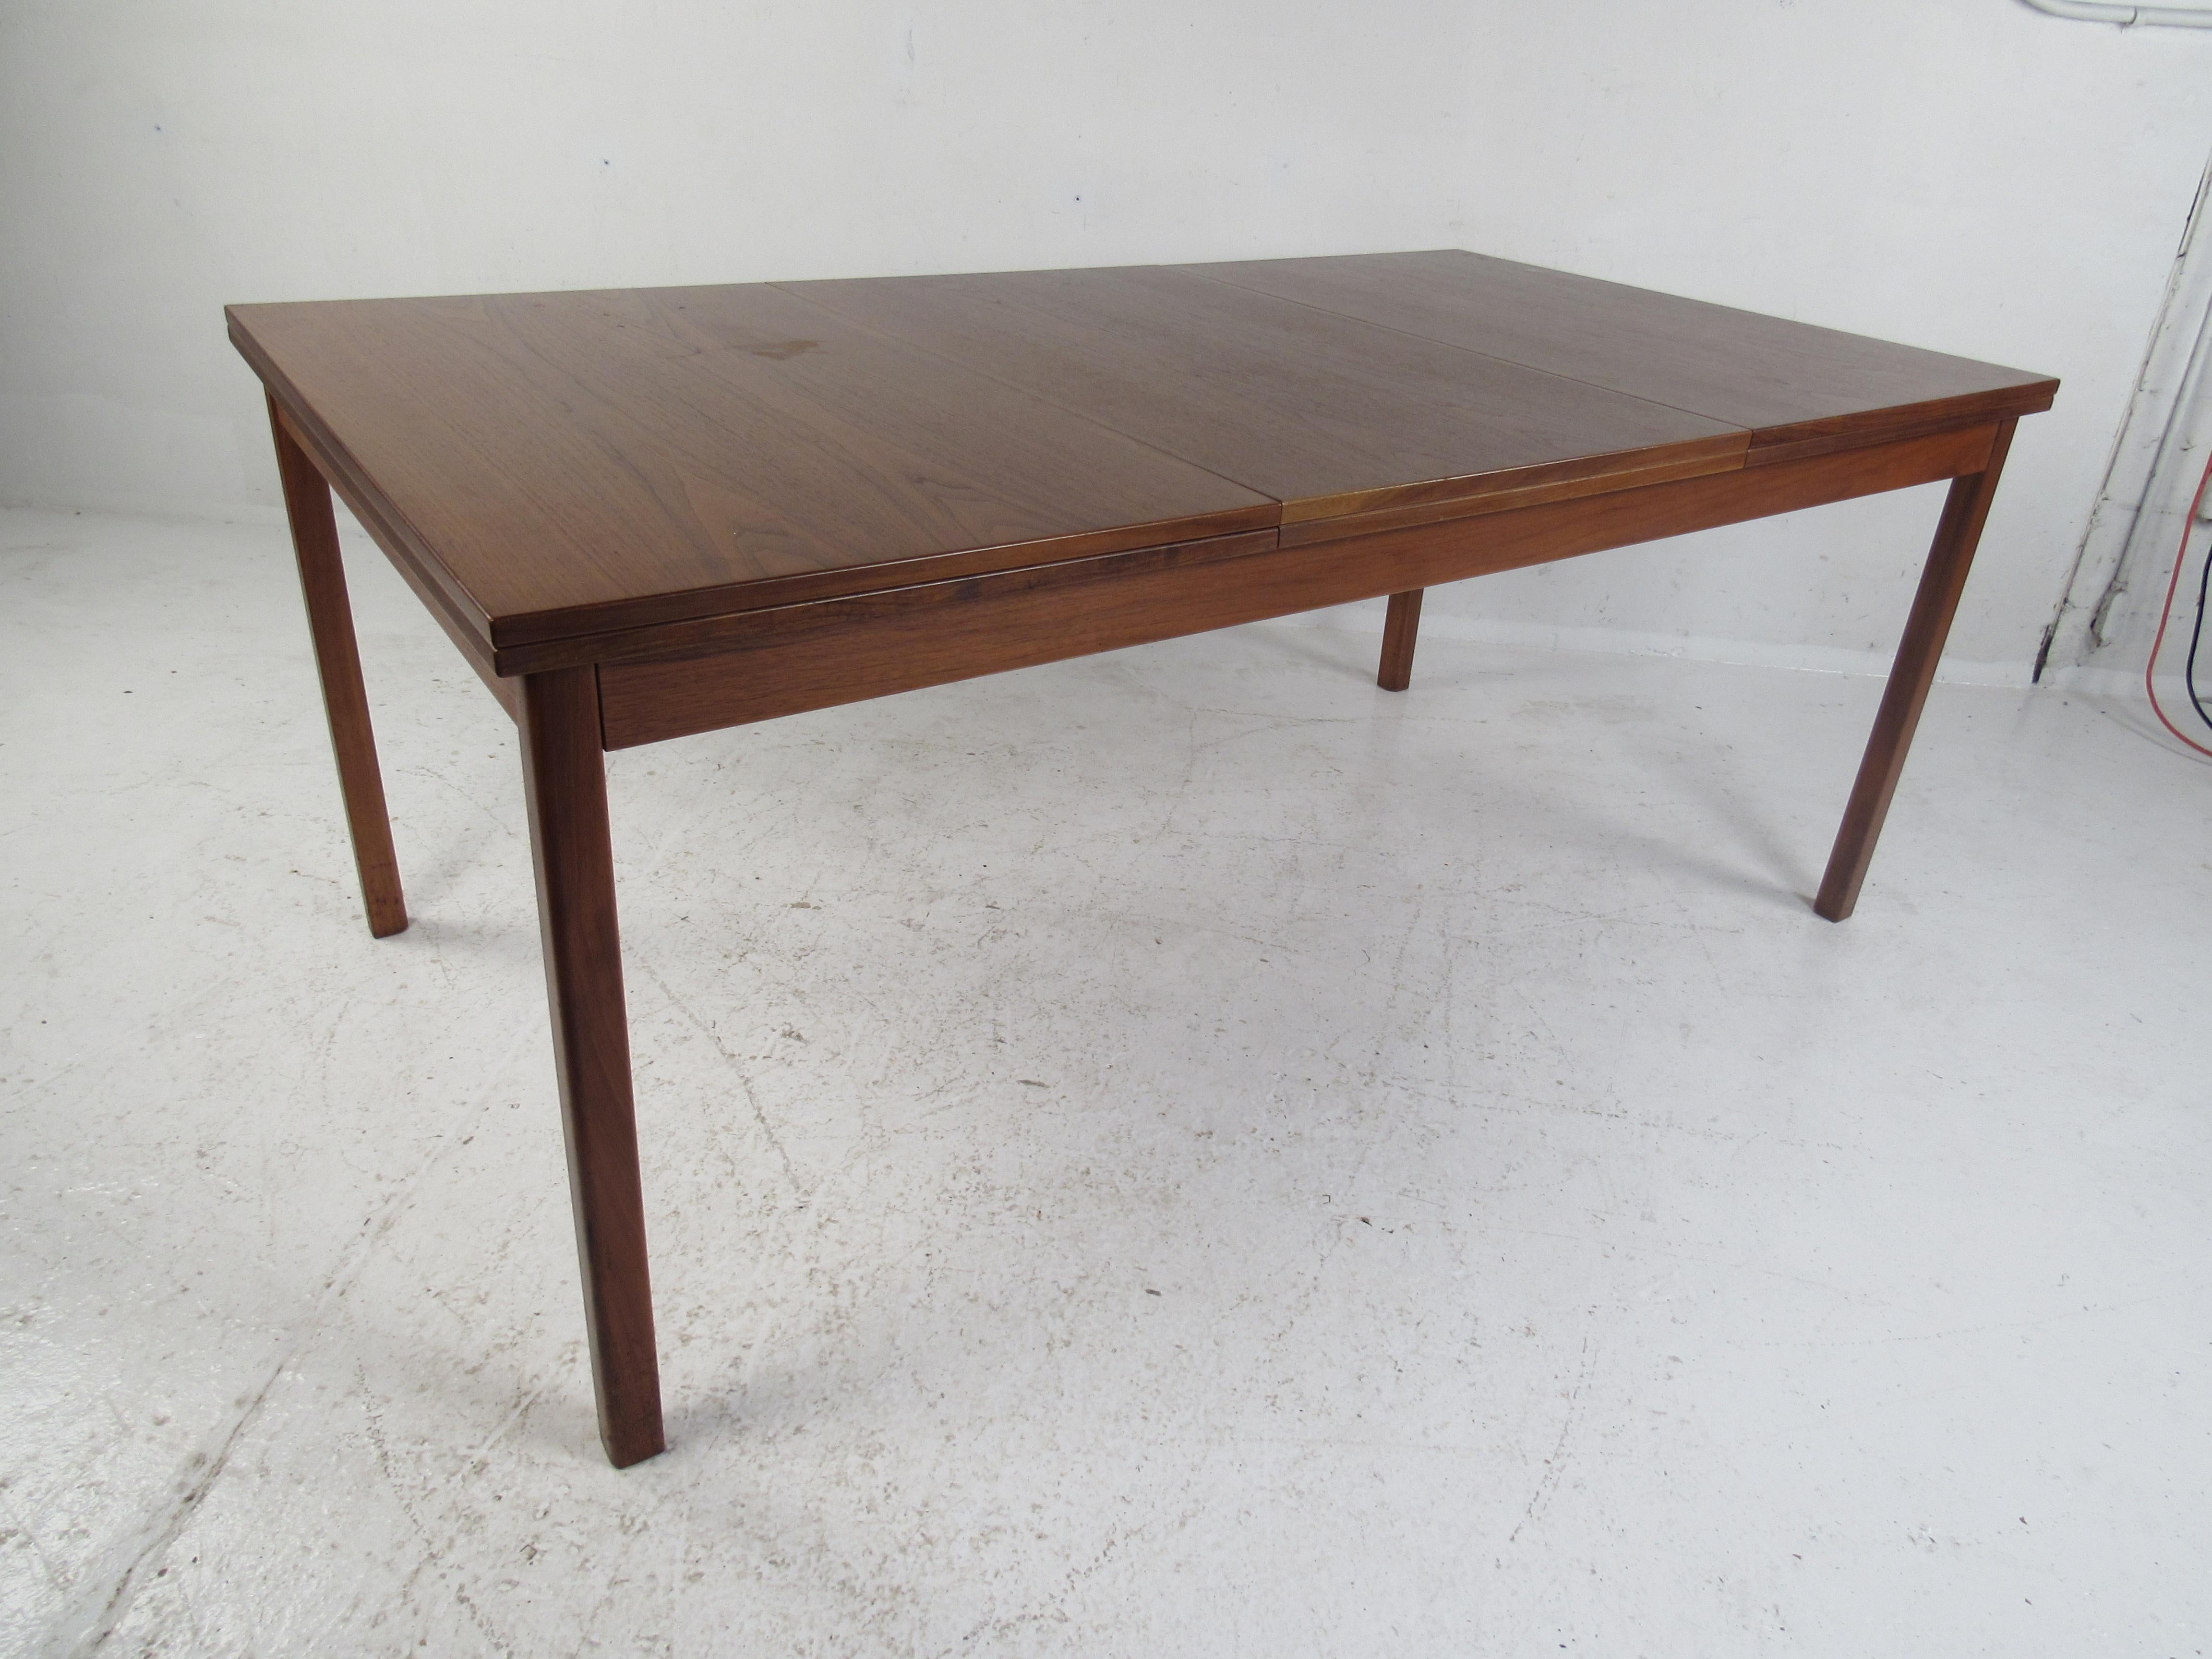 A unique draw leaf design with the ability to cater to many guests. This impressive vintage modern table has four leaves that draw out and extend this table to 118.5 inches wide. A charming vintage walnut finish adds to the midcentury appeal. Please